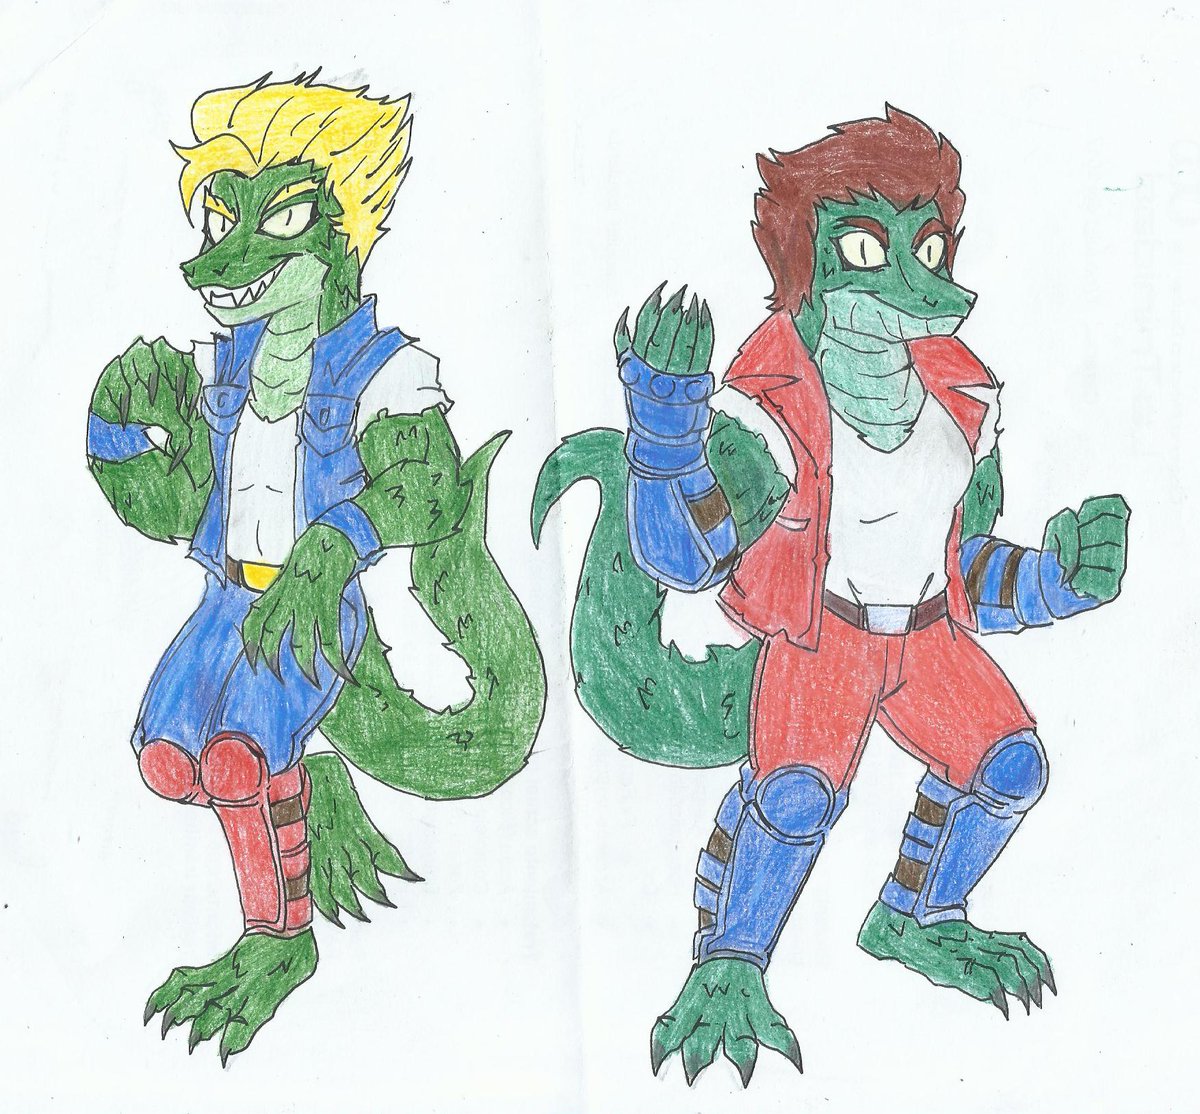 Artwork commission done by @MoraRogelis
-------
Billy and Jimmy Lee are anthro Komoto Dragons🦎🦎
#DoubleDragon